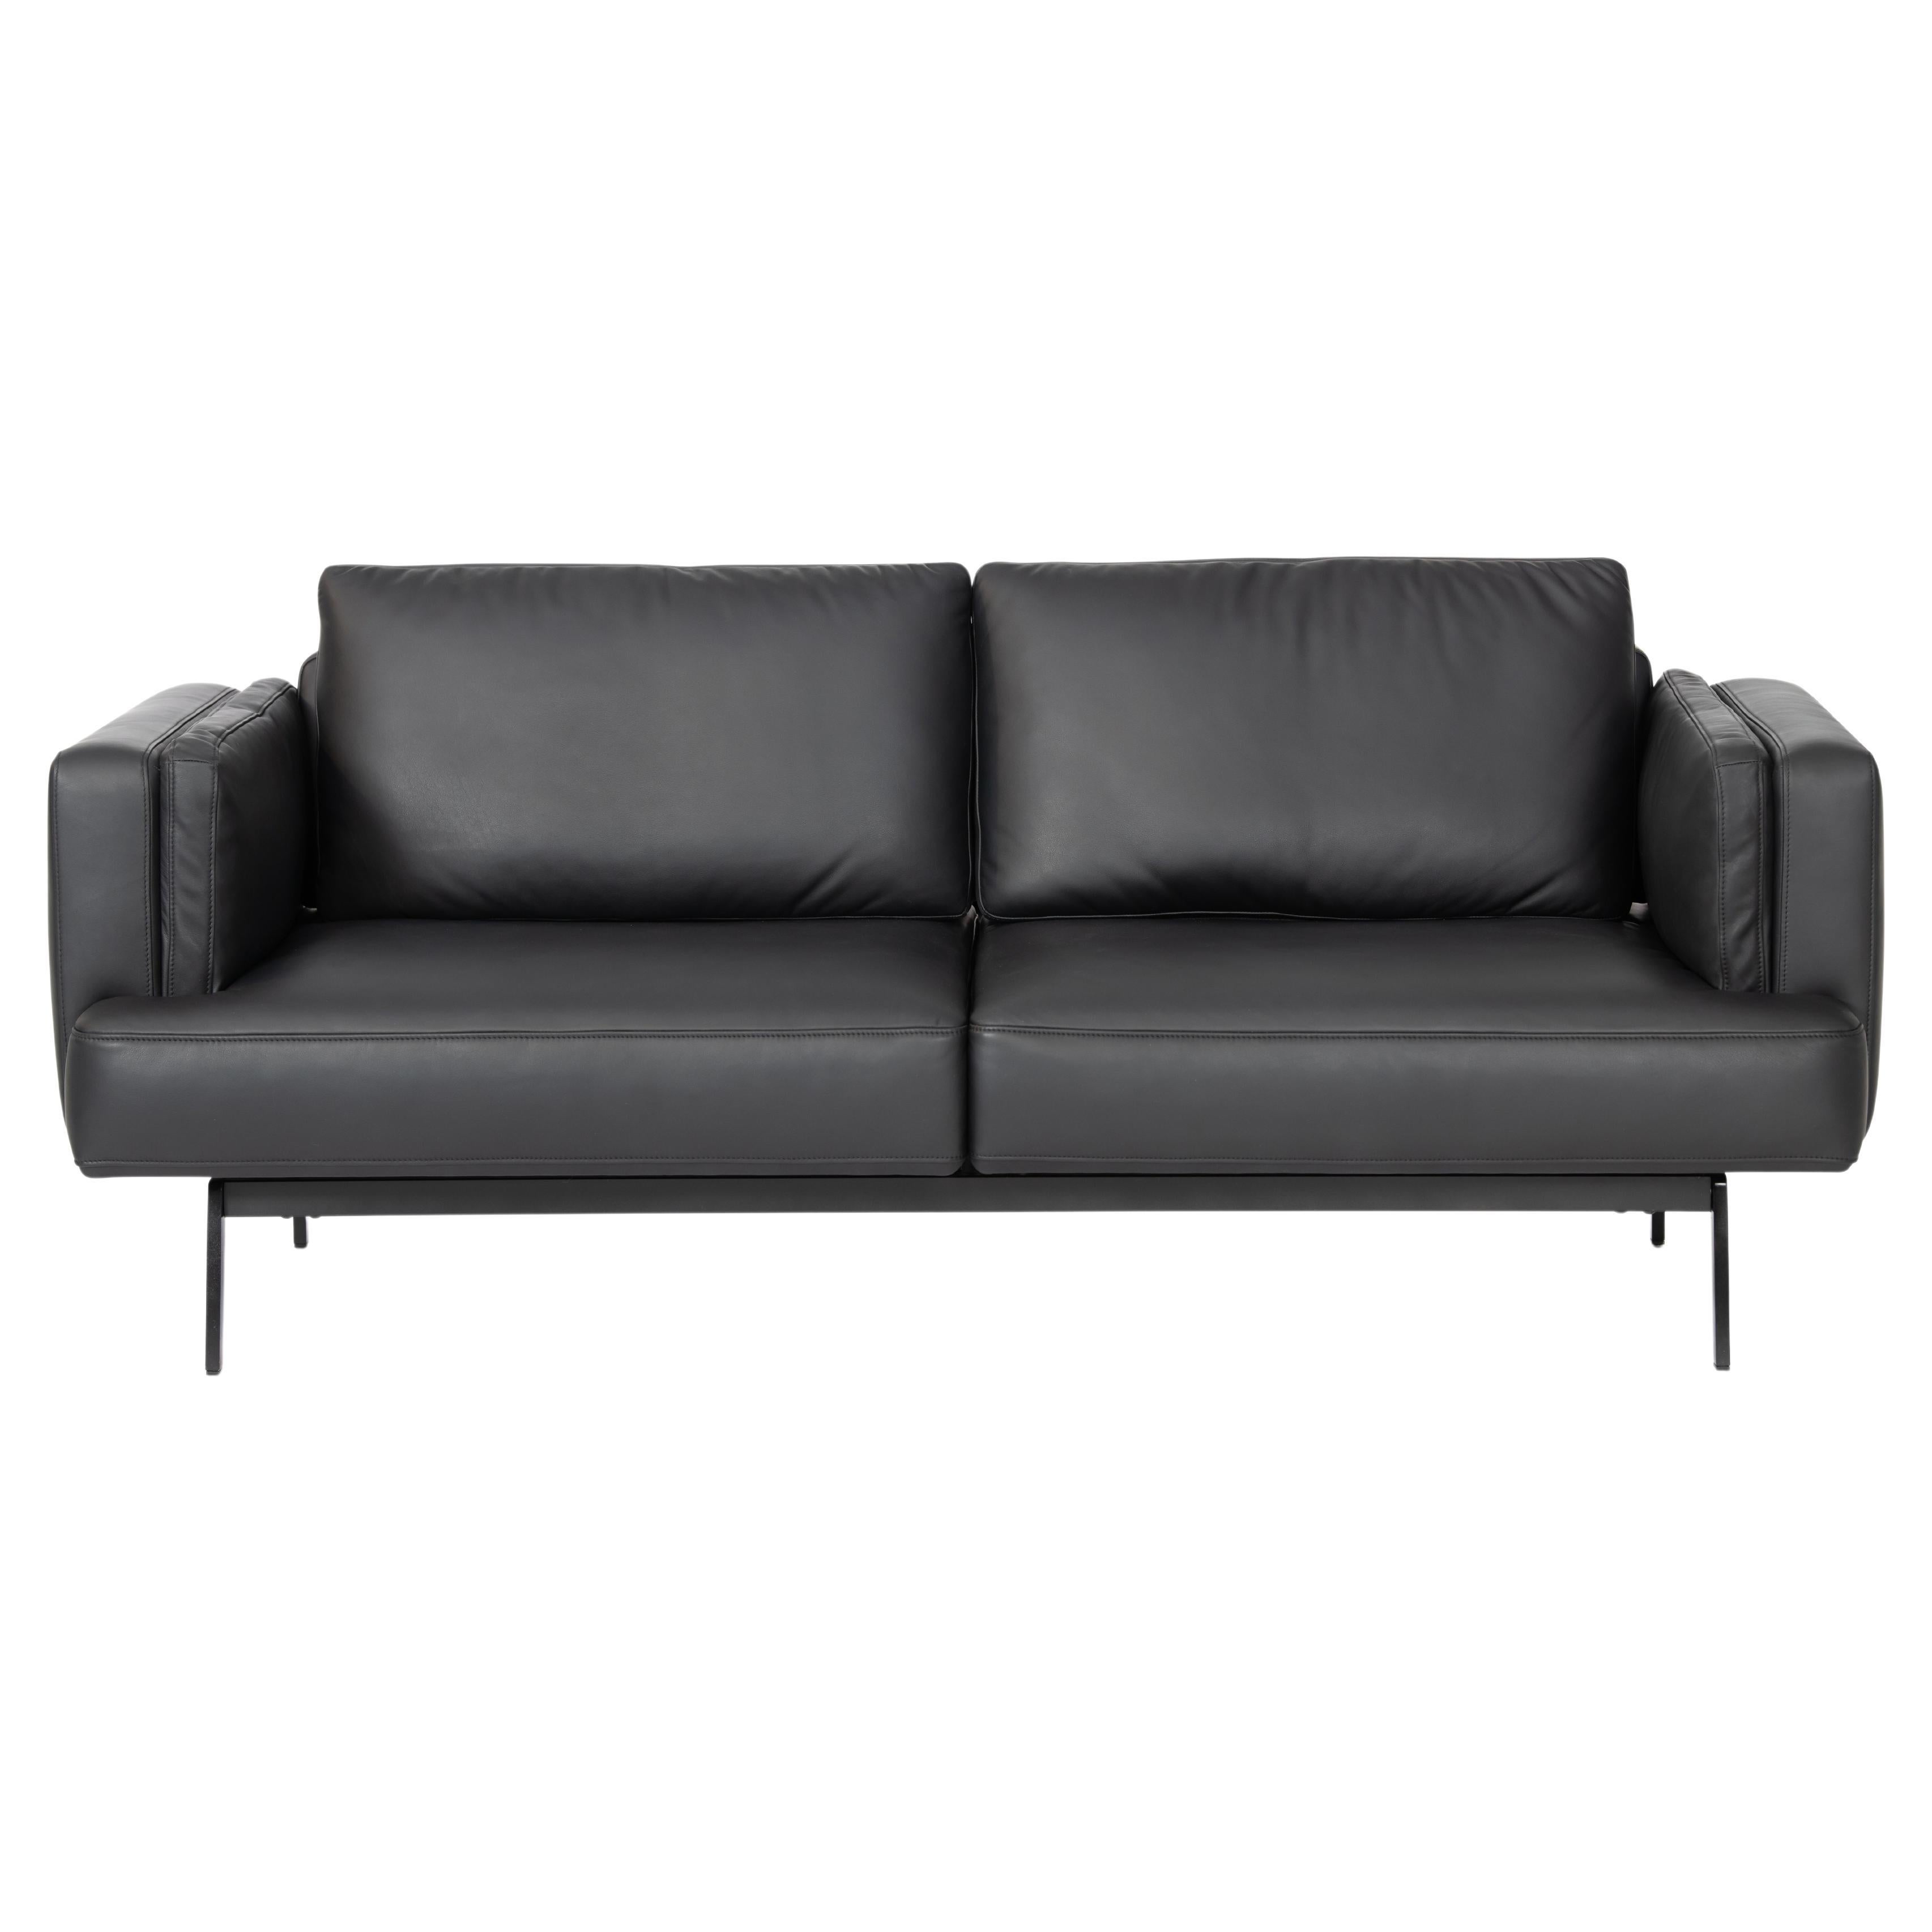 De Sede DS-747/03 Multifunctional Sofa in Black Leather Seat and Back Upholstery